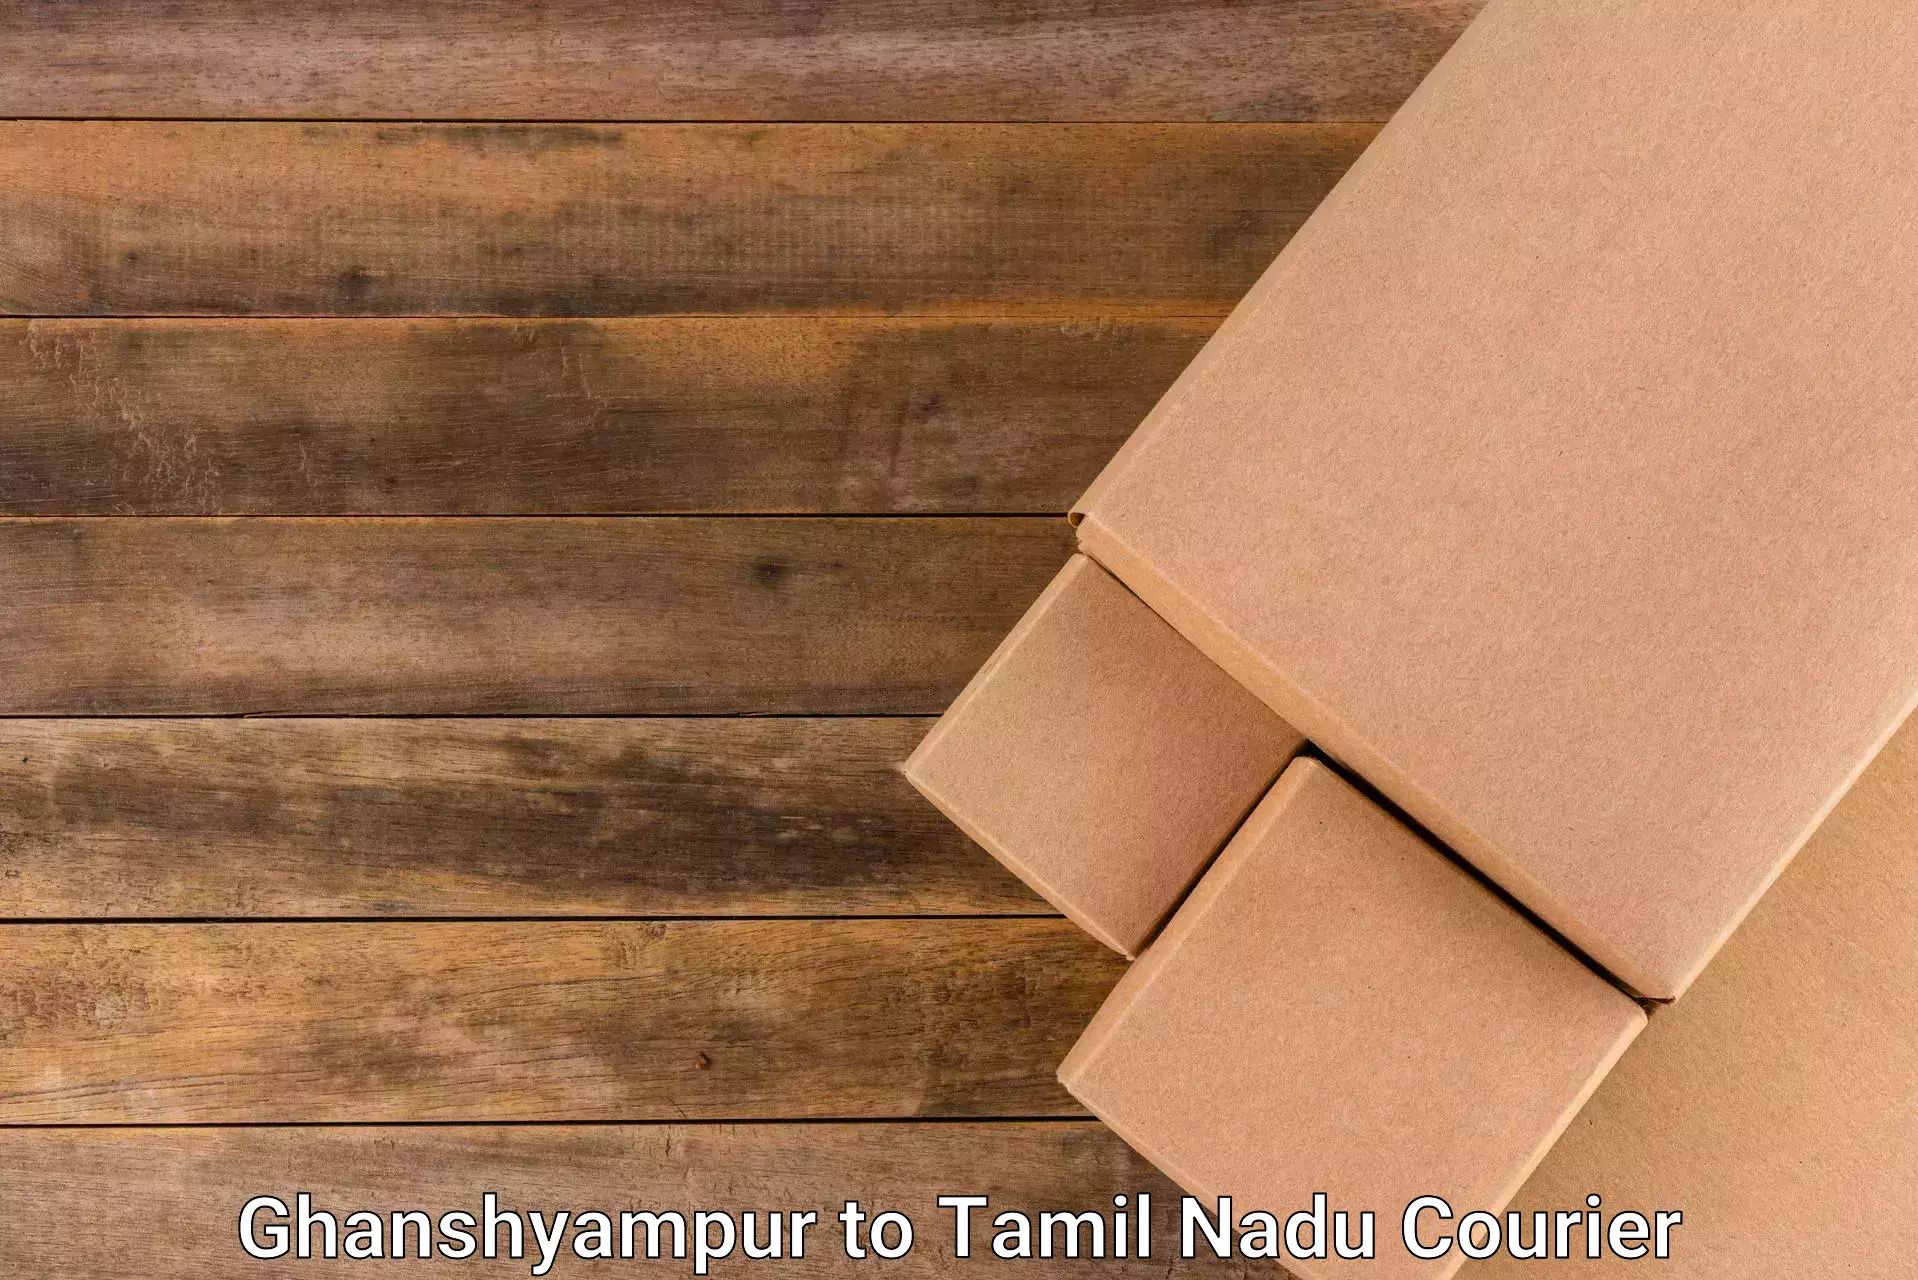 Package delivery network Ghanshyampur to Madurai